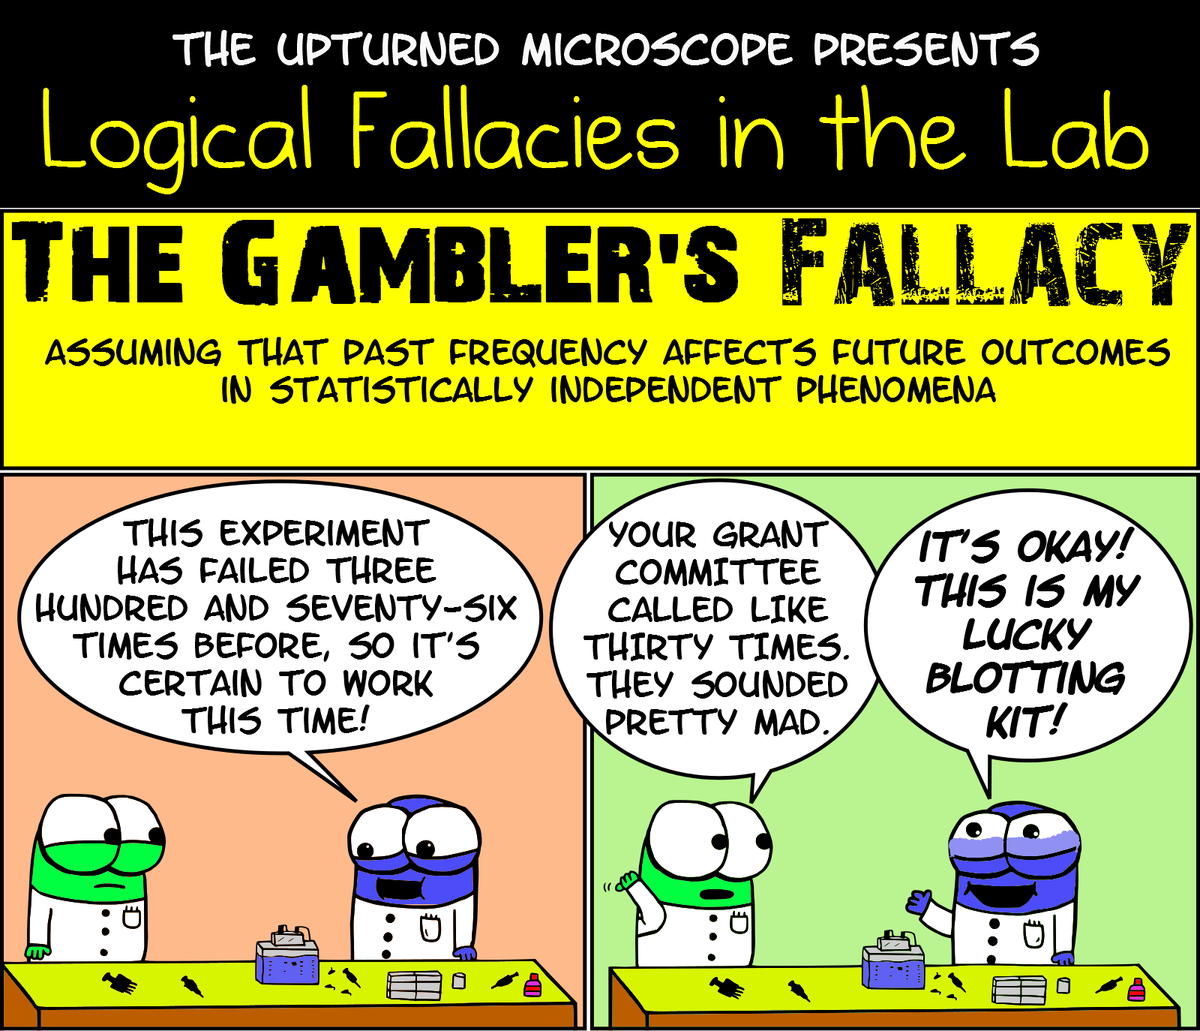 Gambler’s Fallacy. Logical Fallacies. Time Fallacy. The upturned